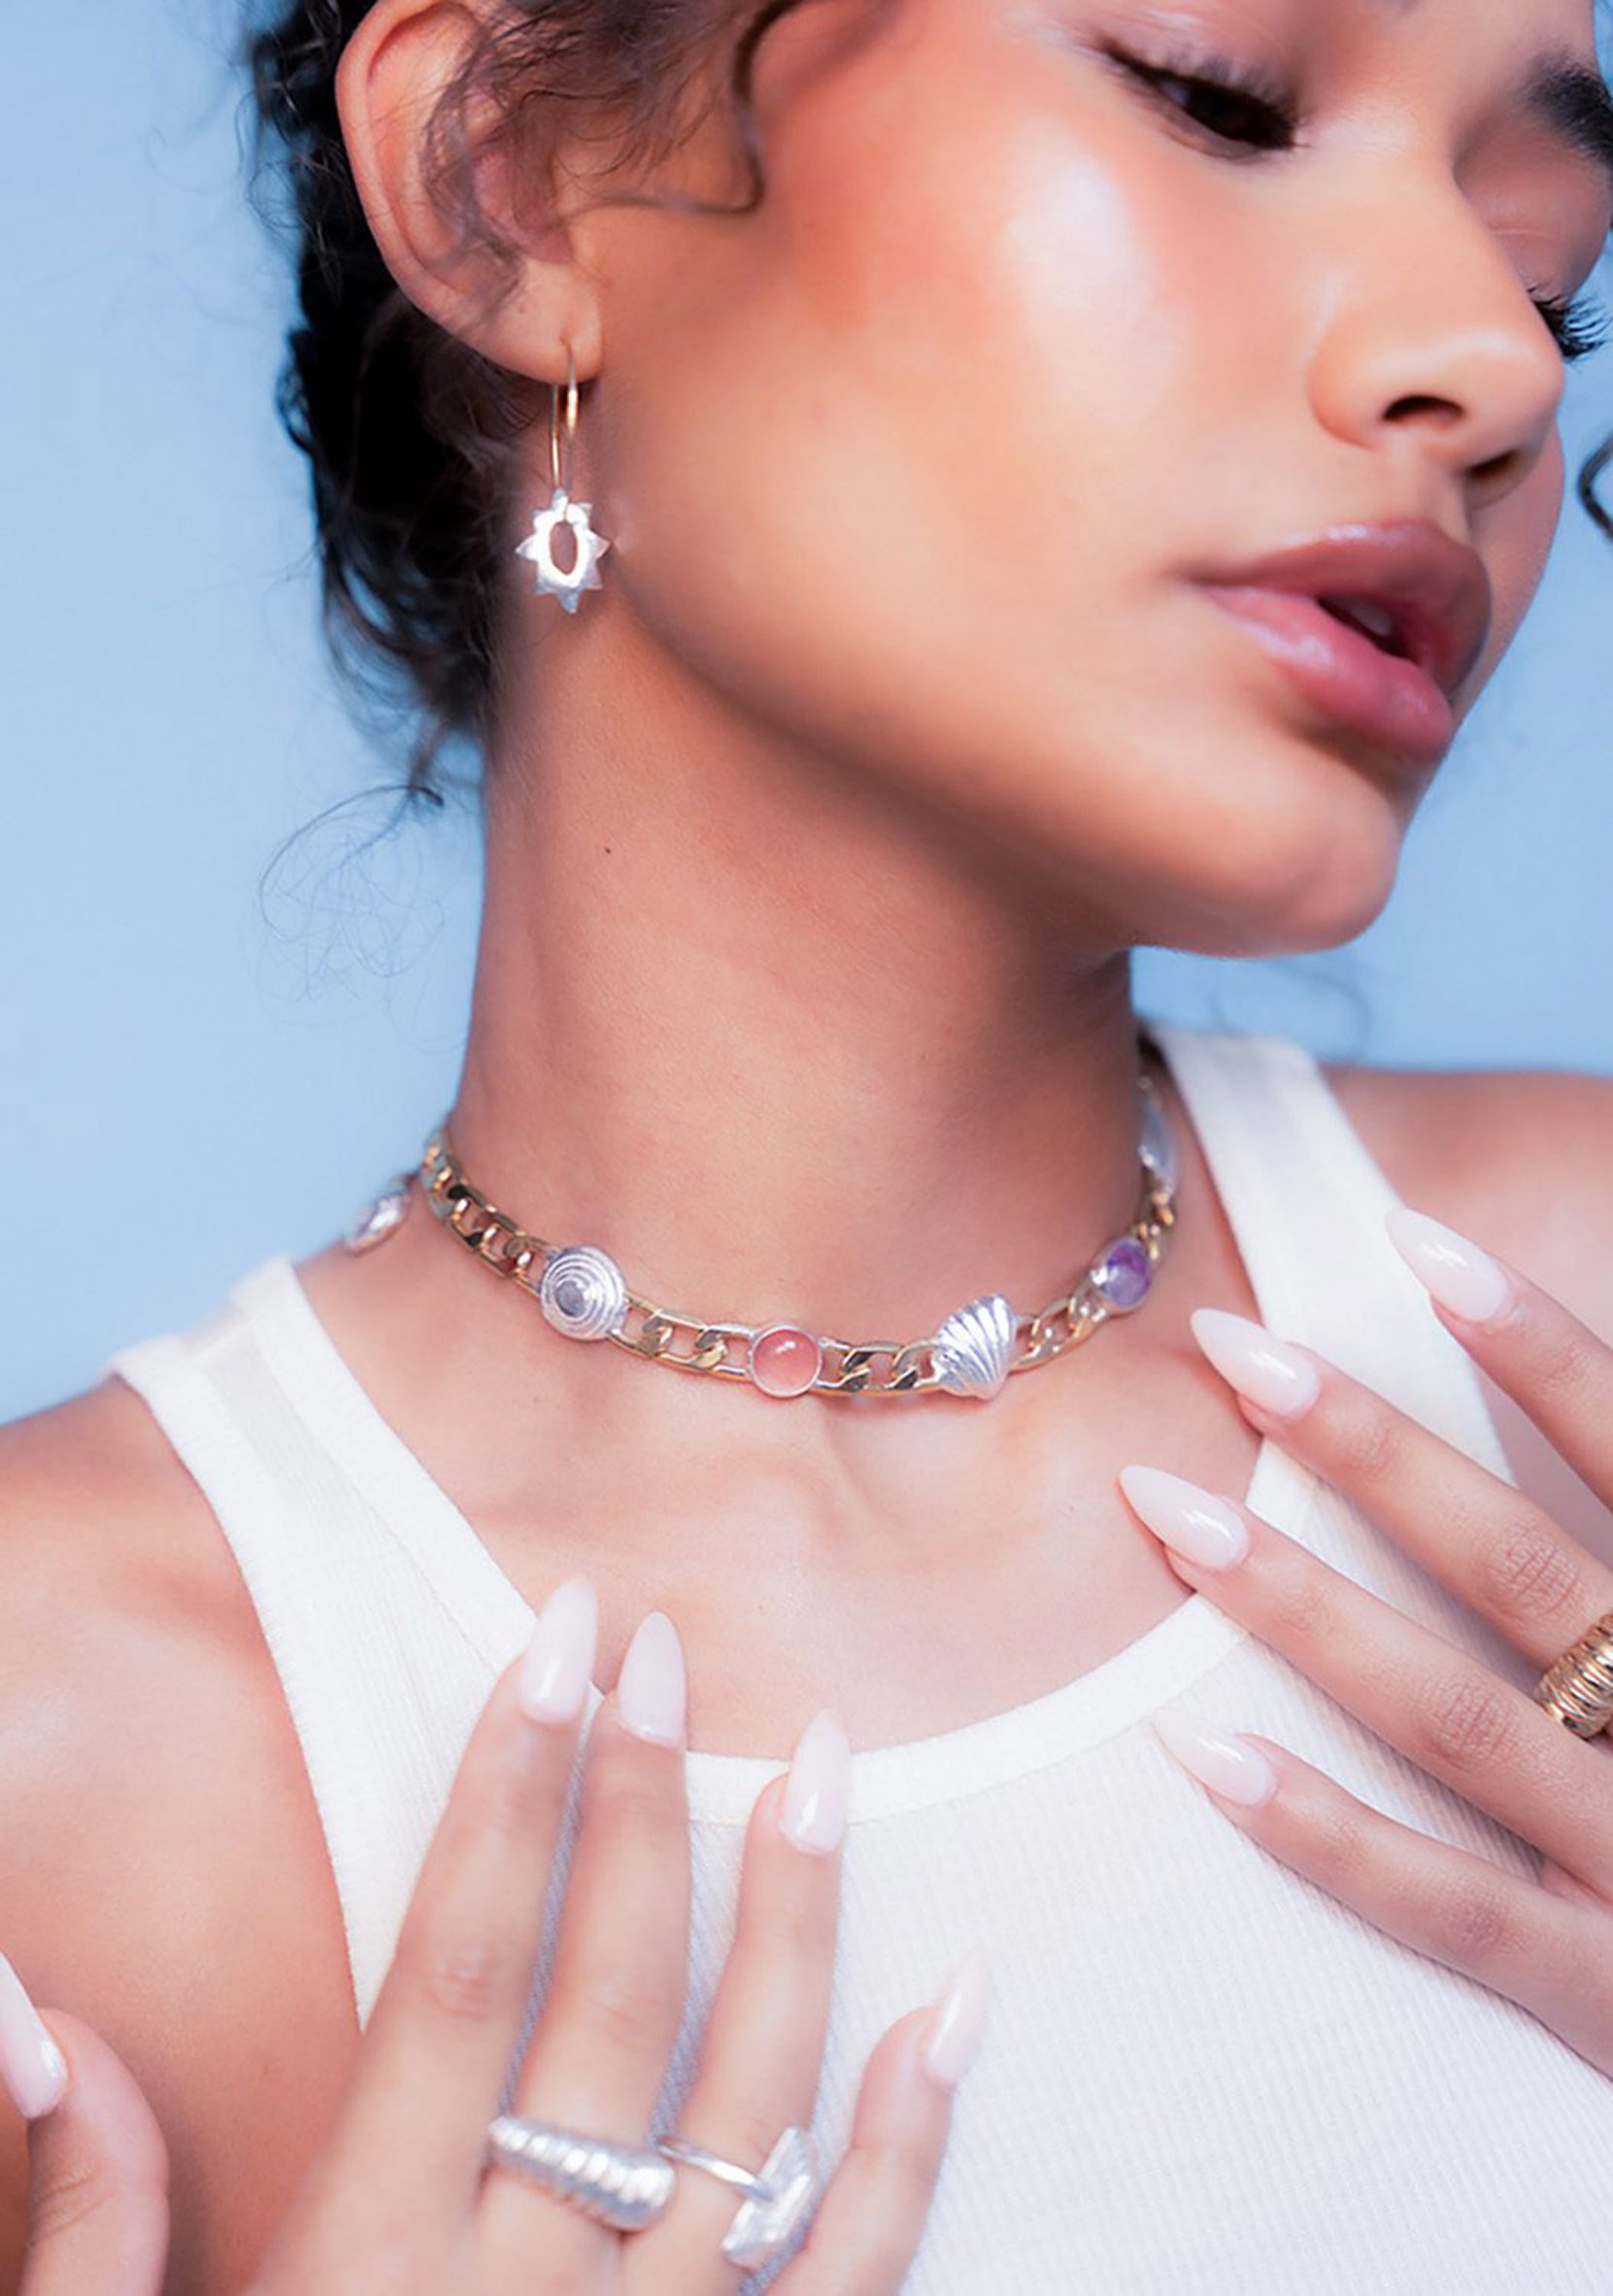 Photograph of model wearing jewellery collection including earrings, rings and a necklace